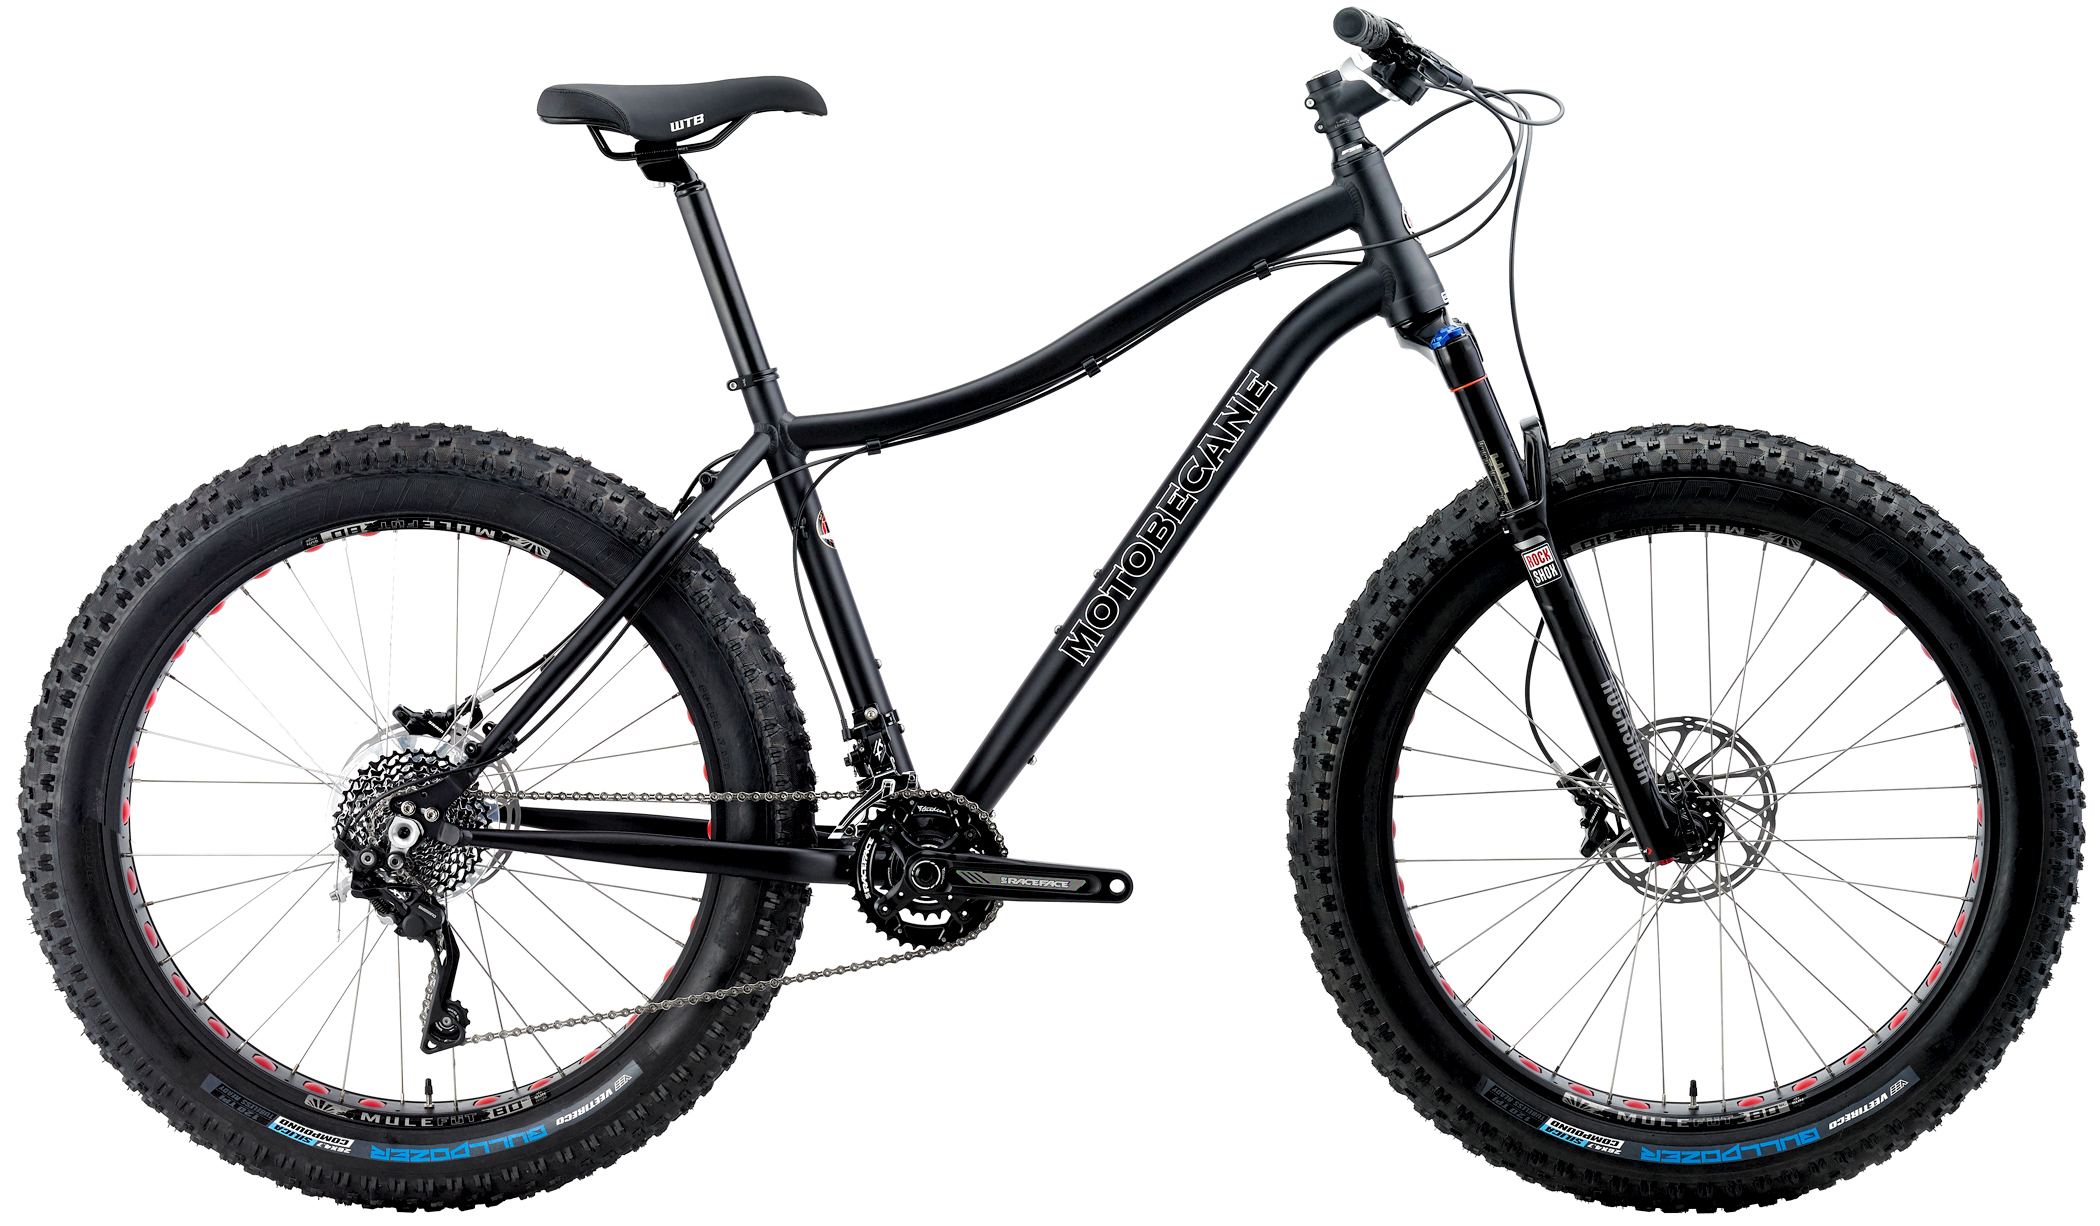 Save up to 60% off new Fat Bikes Motobecane New Boris The Evil Brut Sprung FatBikes With Mulefut 